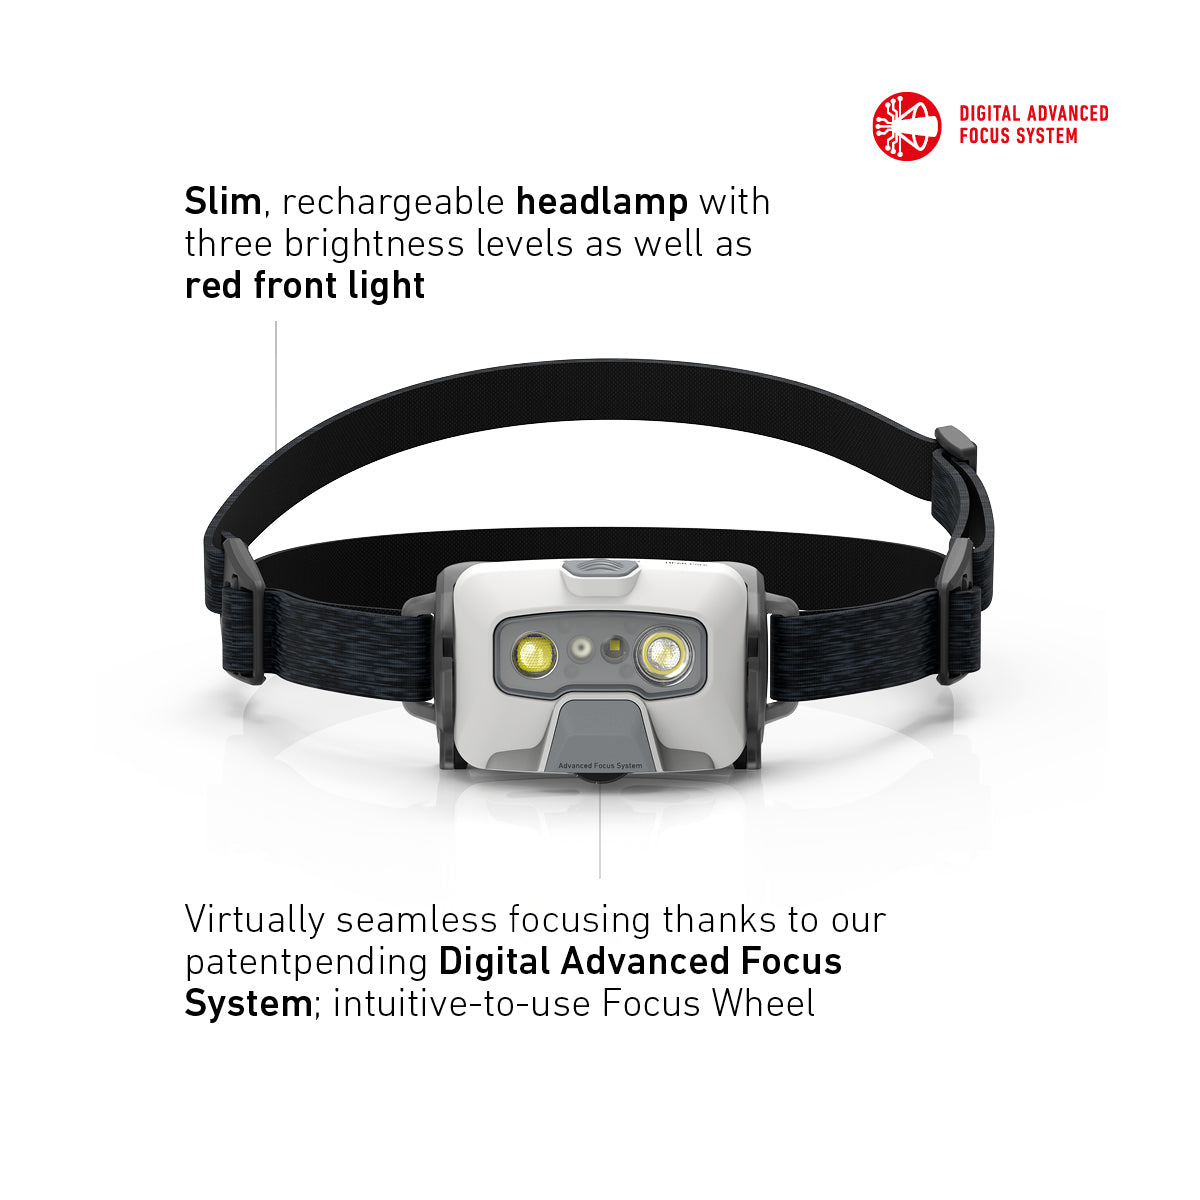 HF6R CORE Rechargeable Head Torch